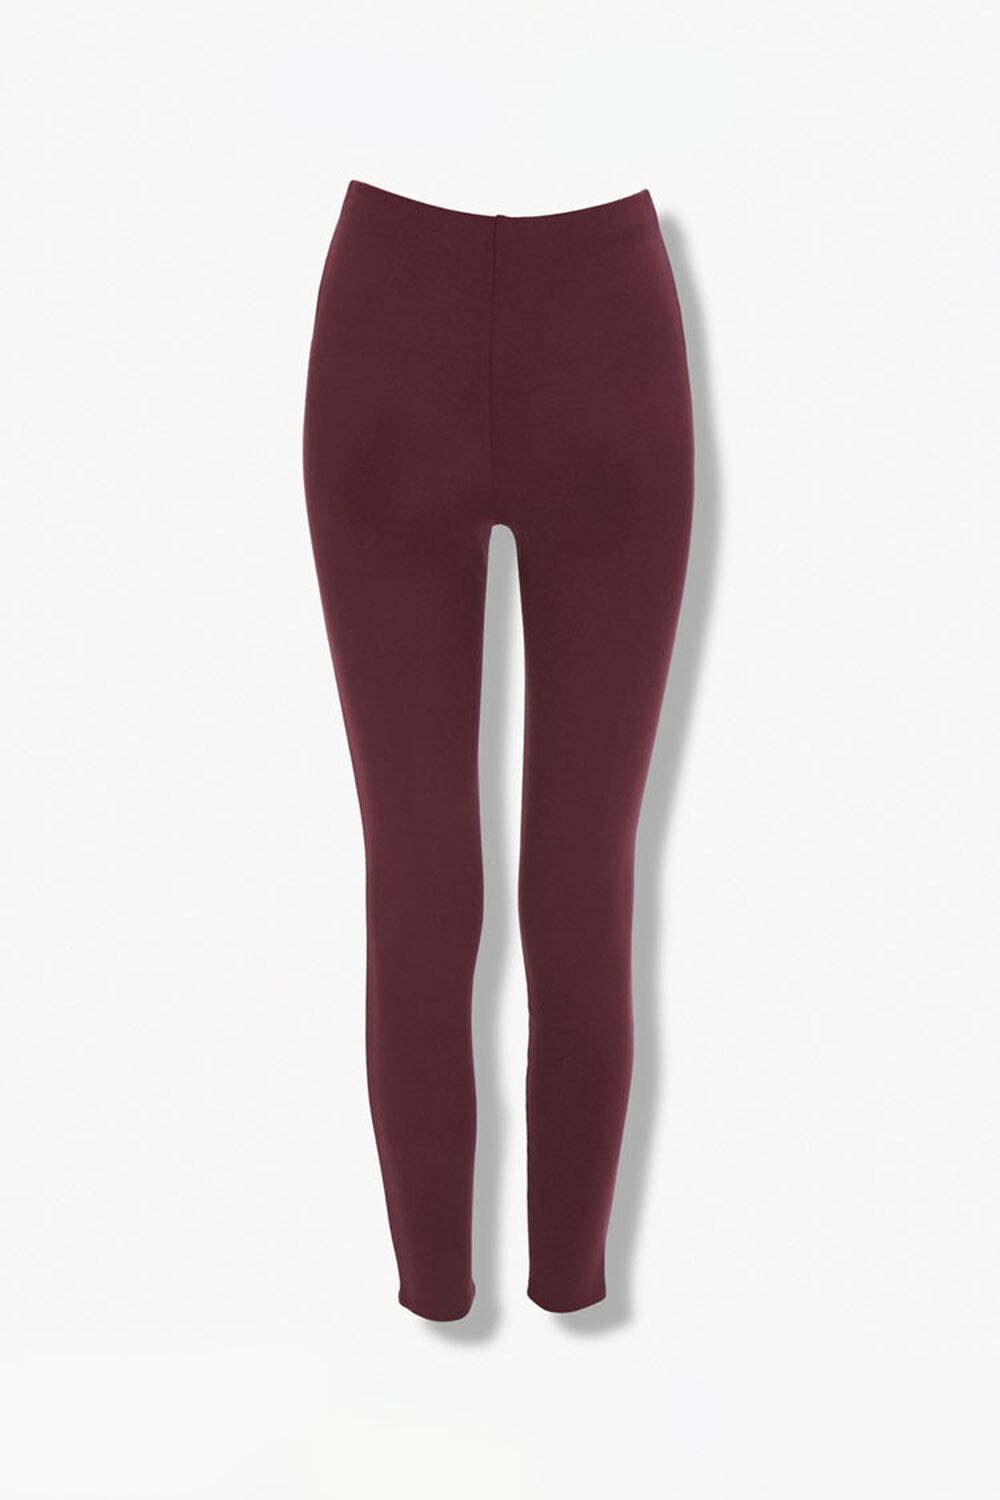 BURGUNDY Classic Thick Knit Leggings, image 3